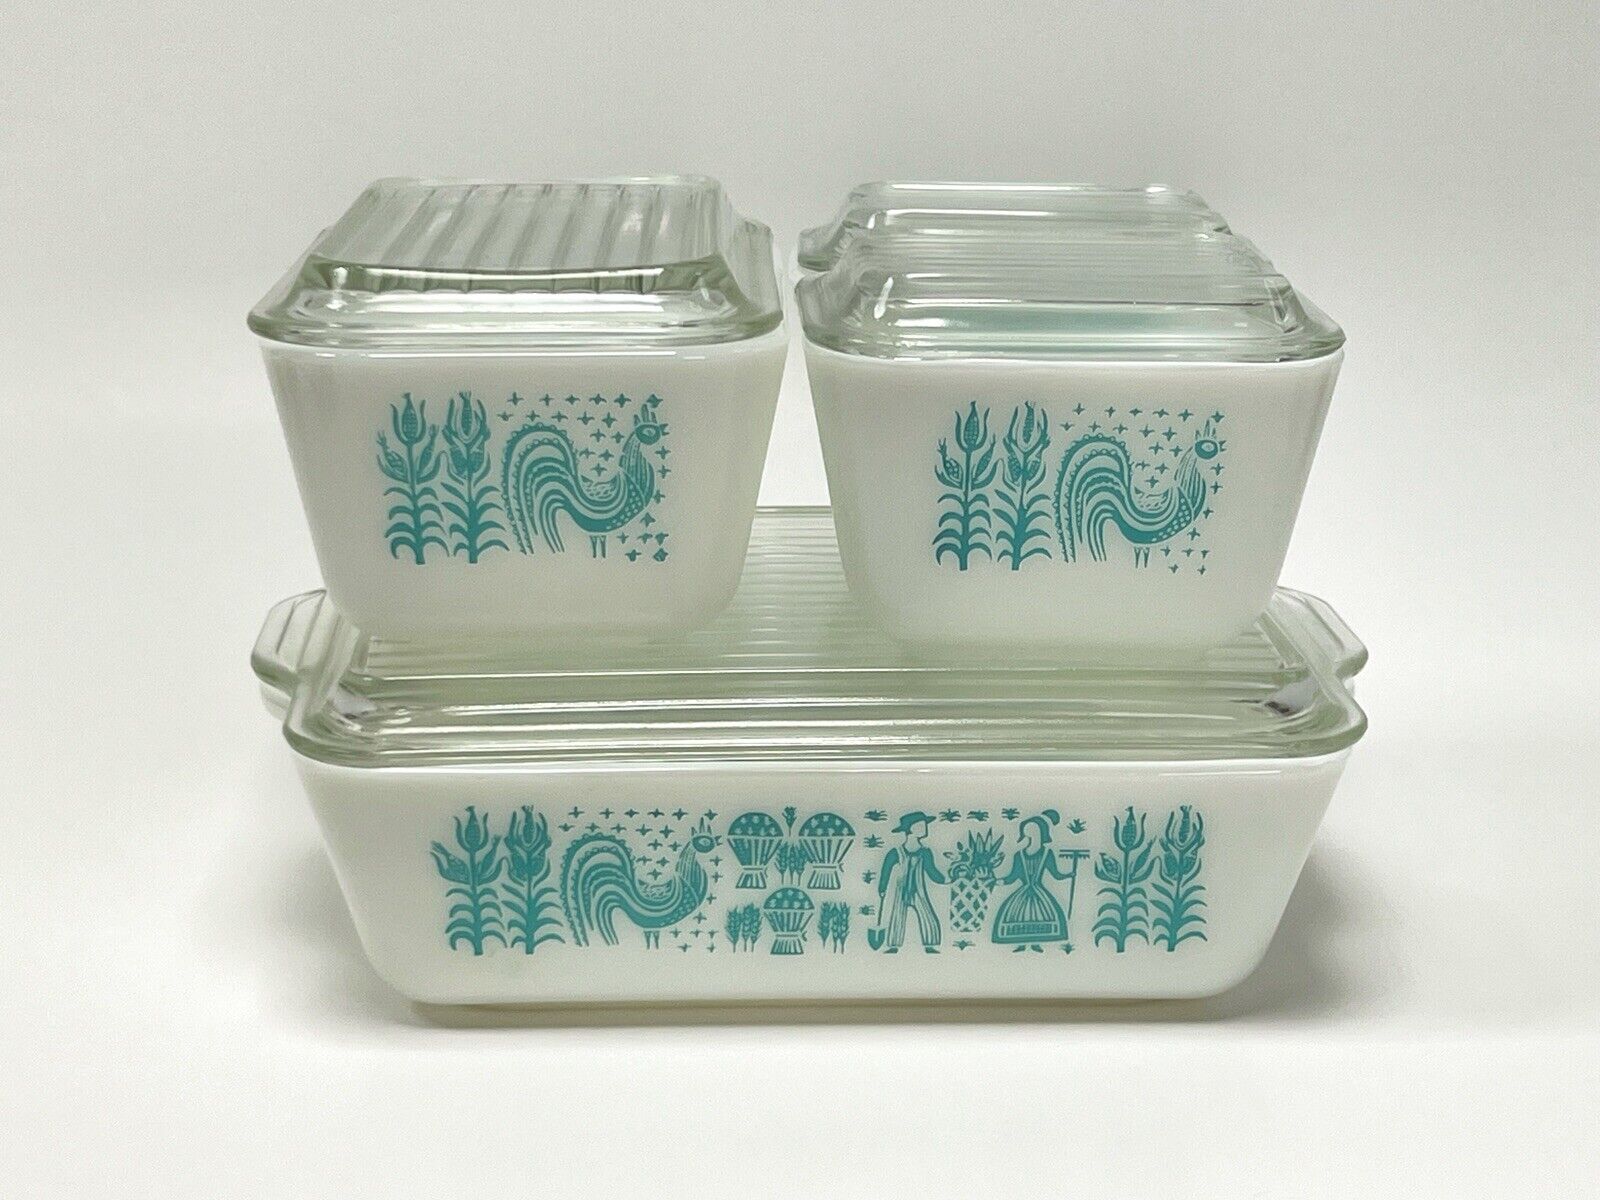 Vntg 50's Pyrex Amish Turquoise Butterprint Refrigerator Full Set of 8 pieces